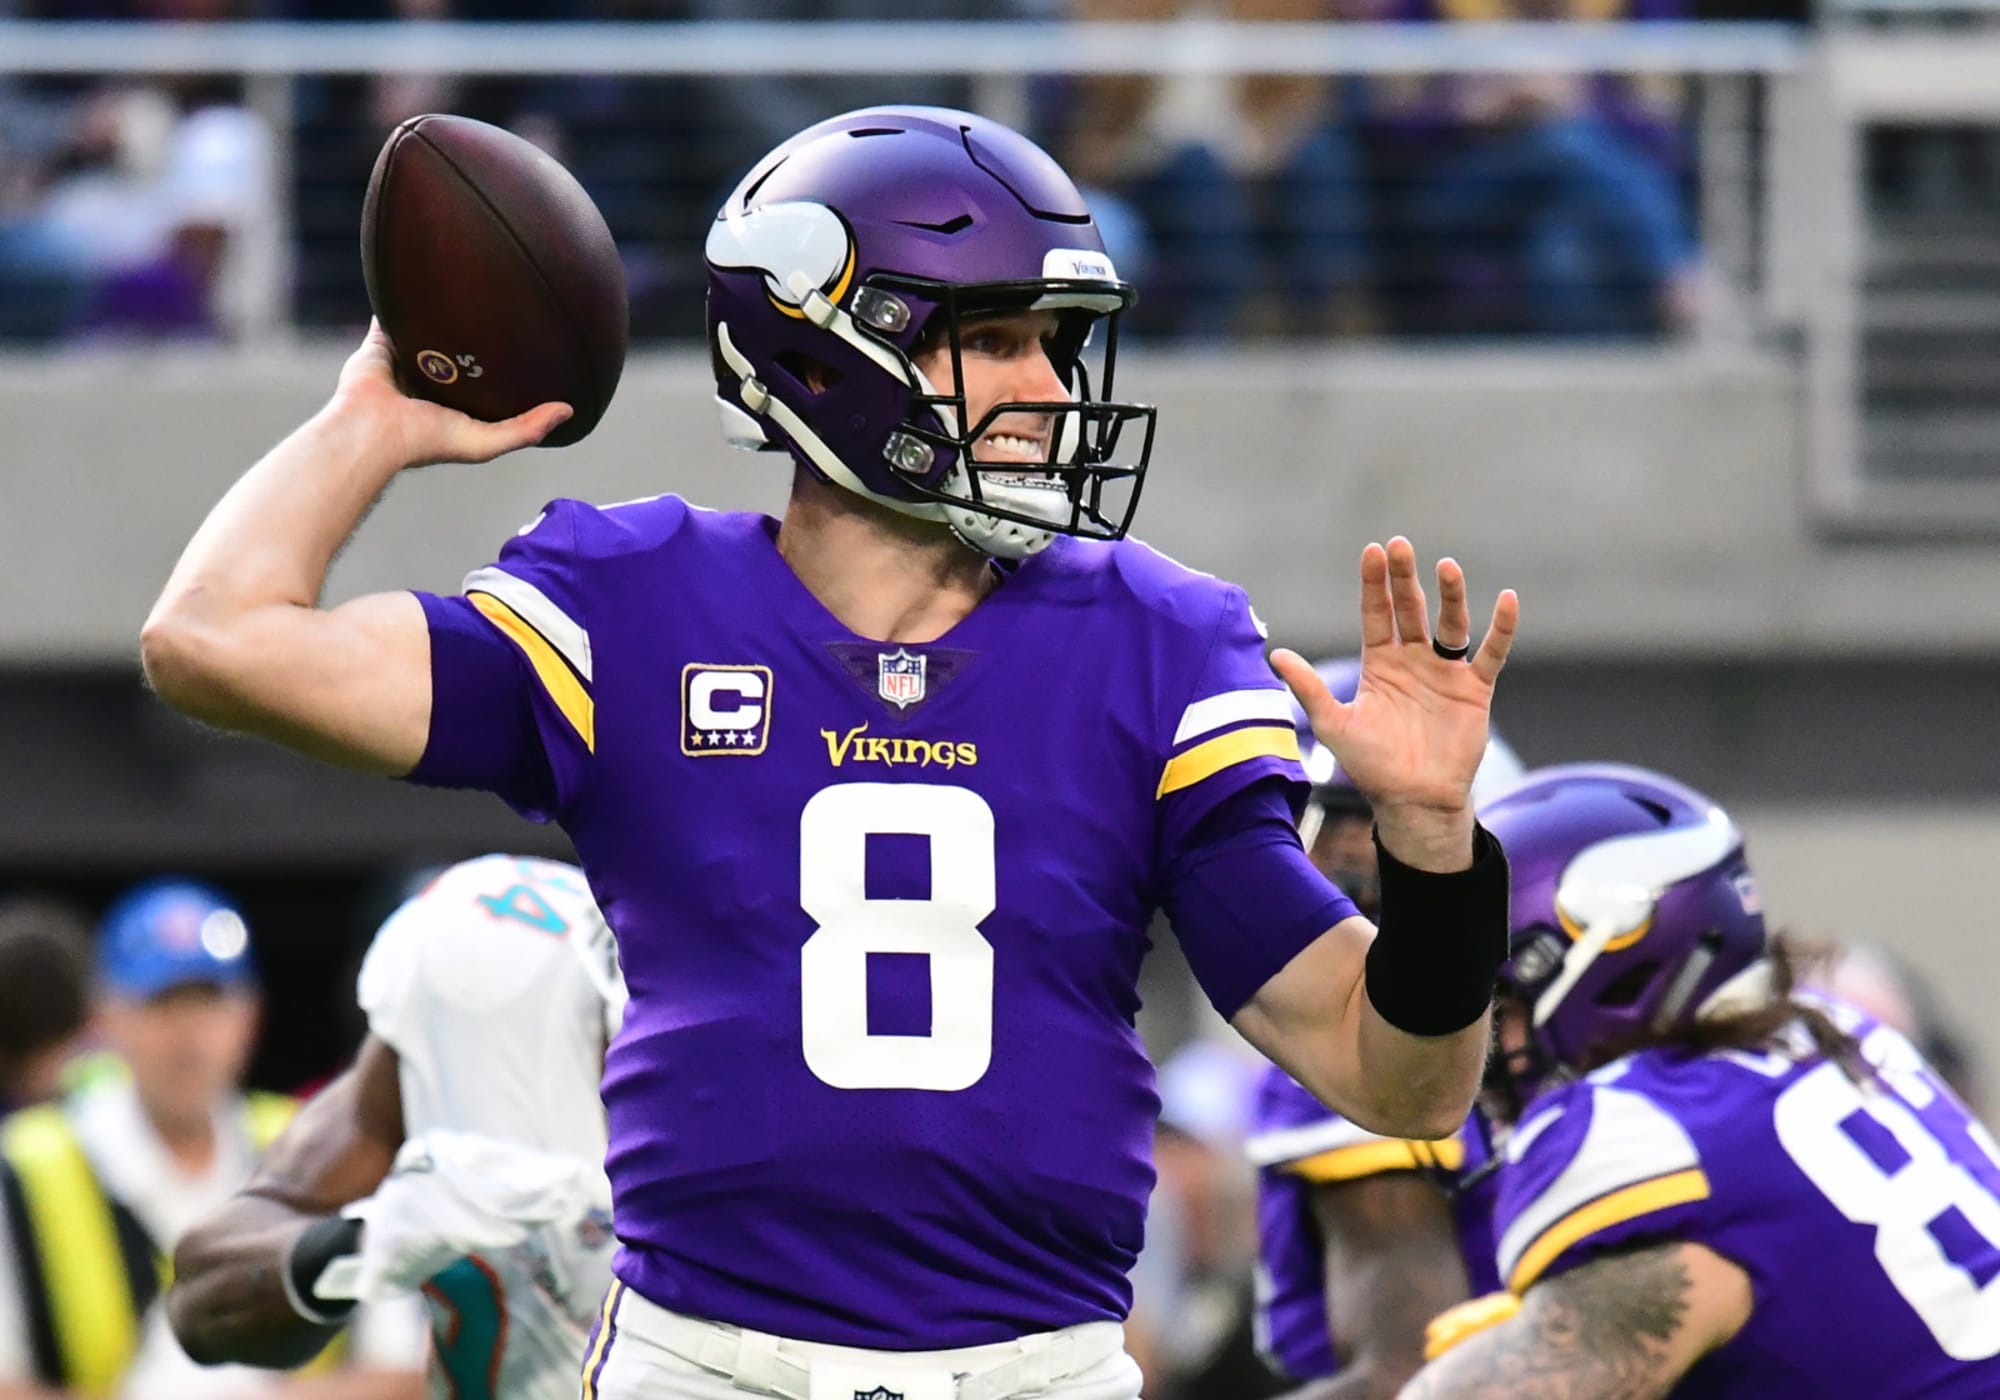 Vikings stun Lions with Hail Mary before halftime (Video)